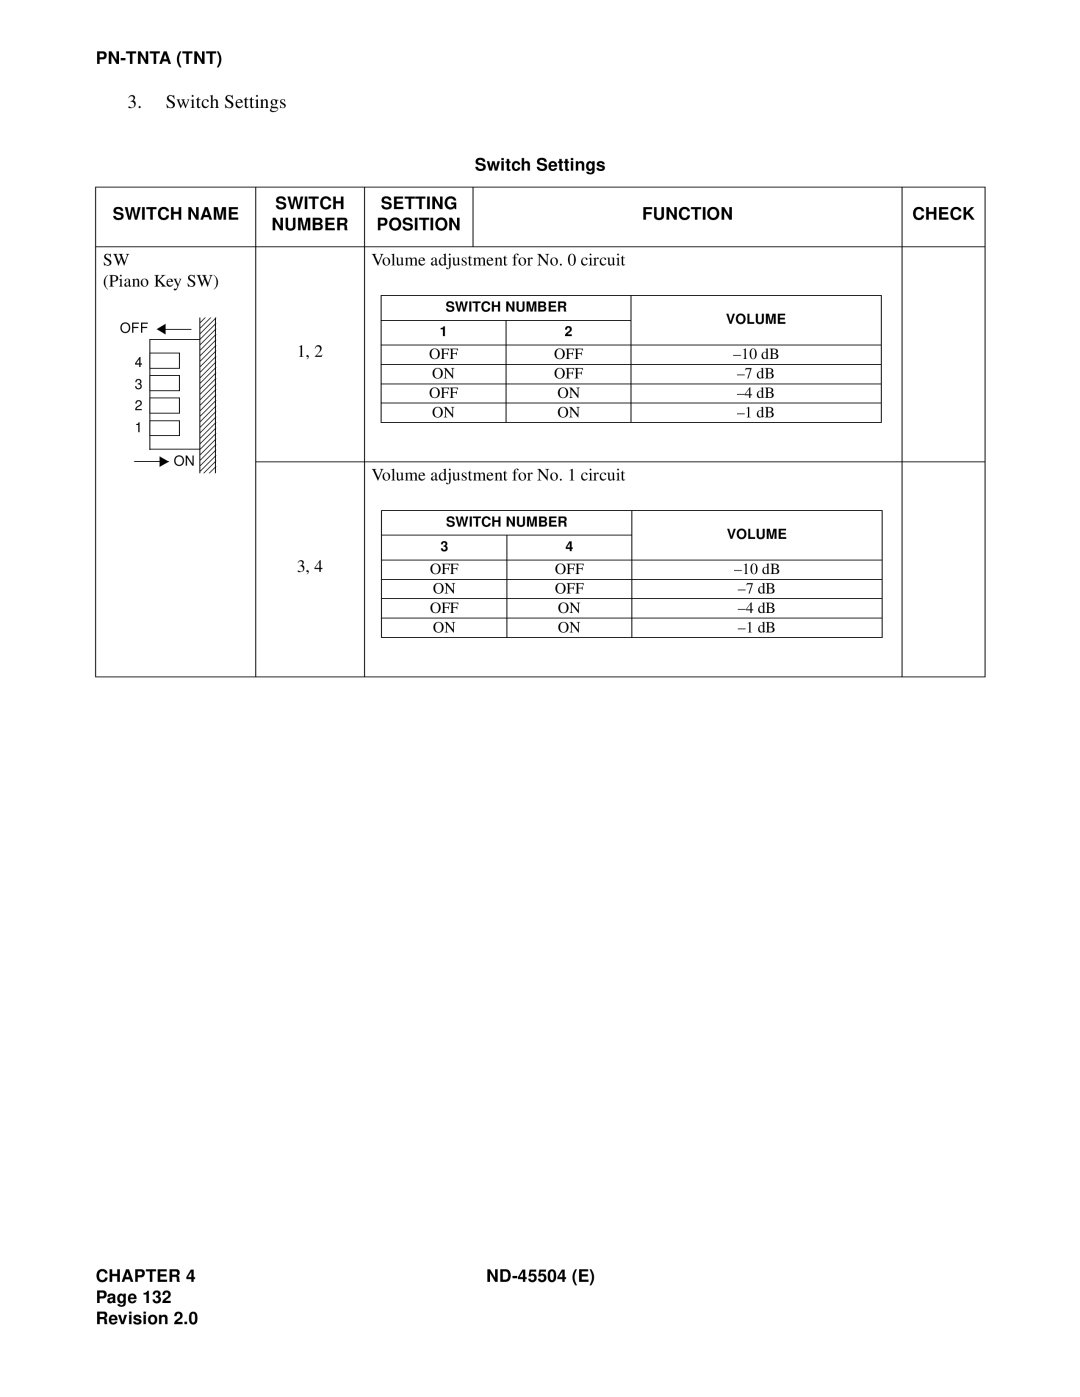 NEC 2000 IVS manual Switch Settings, Volume adjustment for No. 0 circuit, Piano Key SW, Volume adjustment for No. 1 circuit 